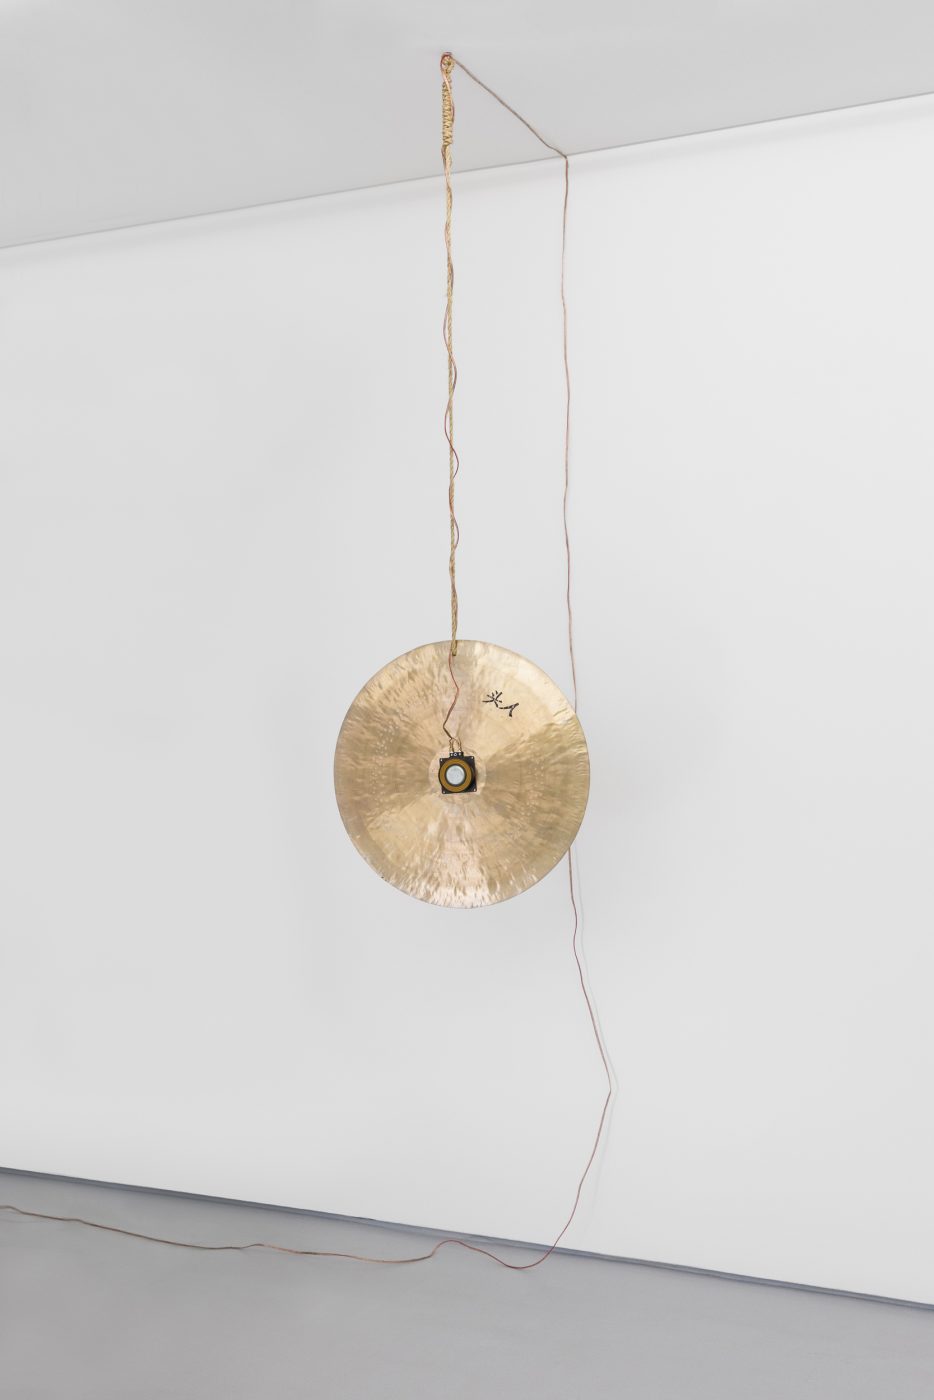 Nuno da Luz, Wave Turbulence on Thin Plate – Nazaré Ocean Buoy, 2019. Wind gong vibrating according to ocean wave turbulence gathered by the Nazaré ocean buoy between January and December 2018, and compressed into 60 minutes. Gong, sisal rope, contact speaker, loudspeaker cable, amplifier, sound. 60’ (loop), dimensions variable
